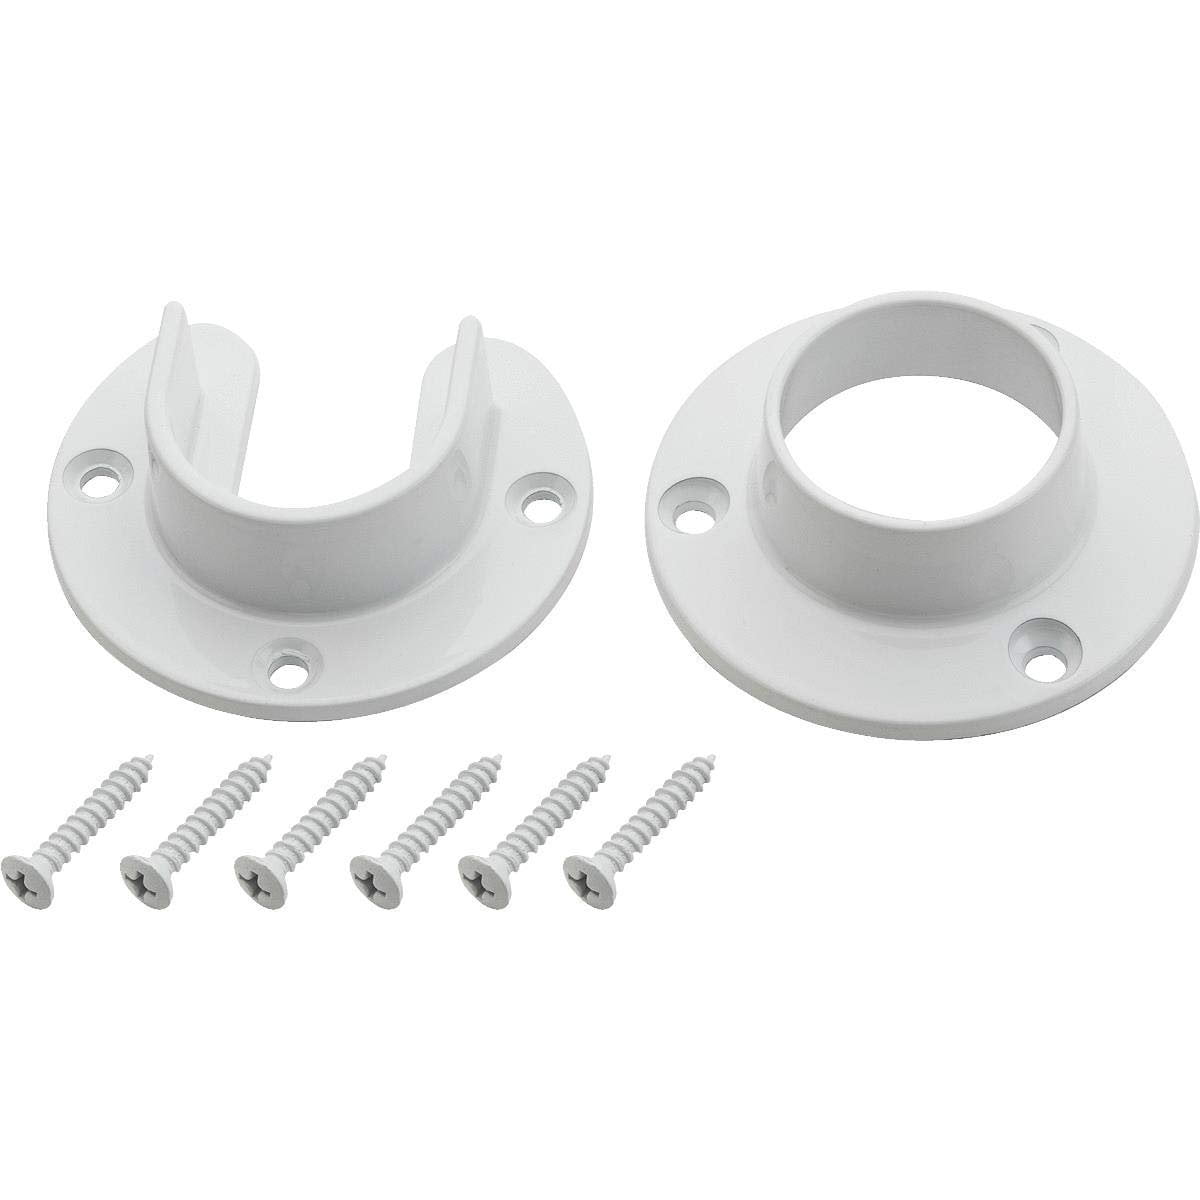 Prime-Line Products N 6568 Closet Pole Sockets Plastic White 1-3/8 in. 